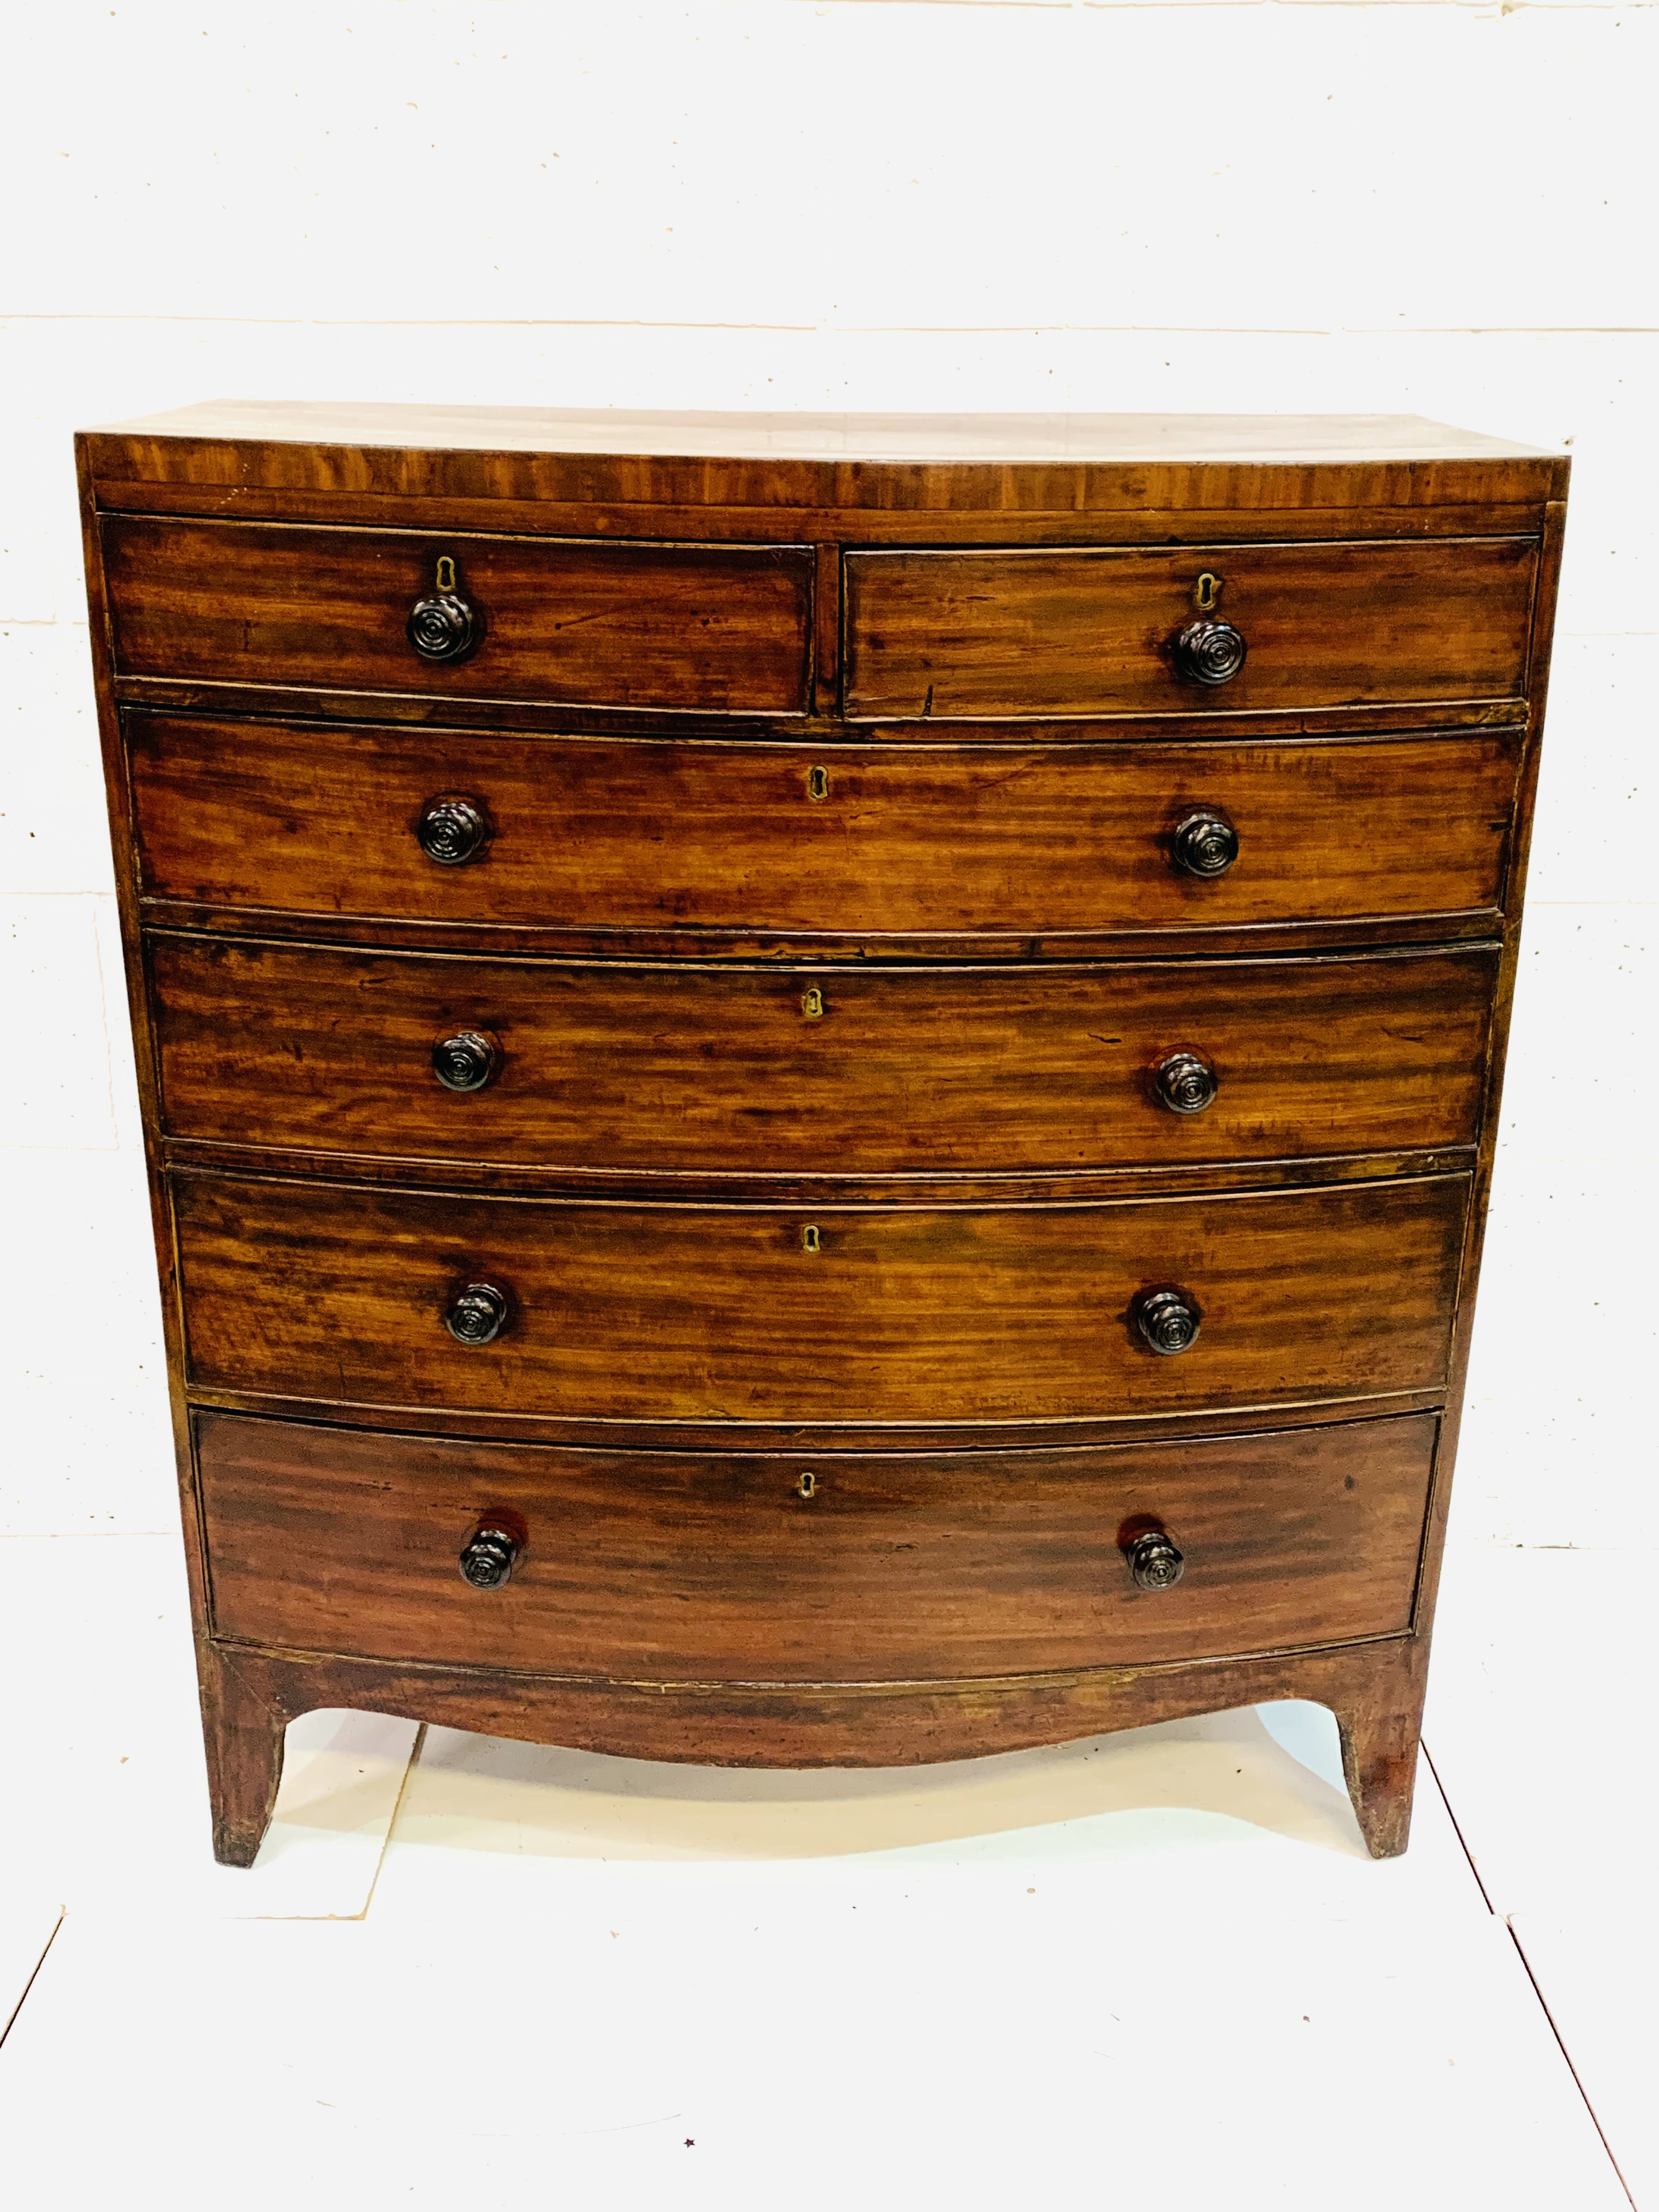 Early 19th Century mahogany bow-fronted chest of drawers